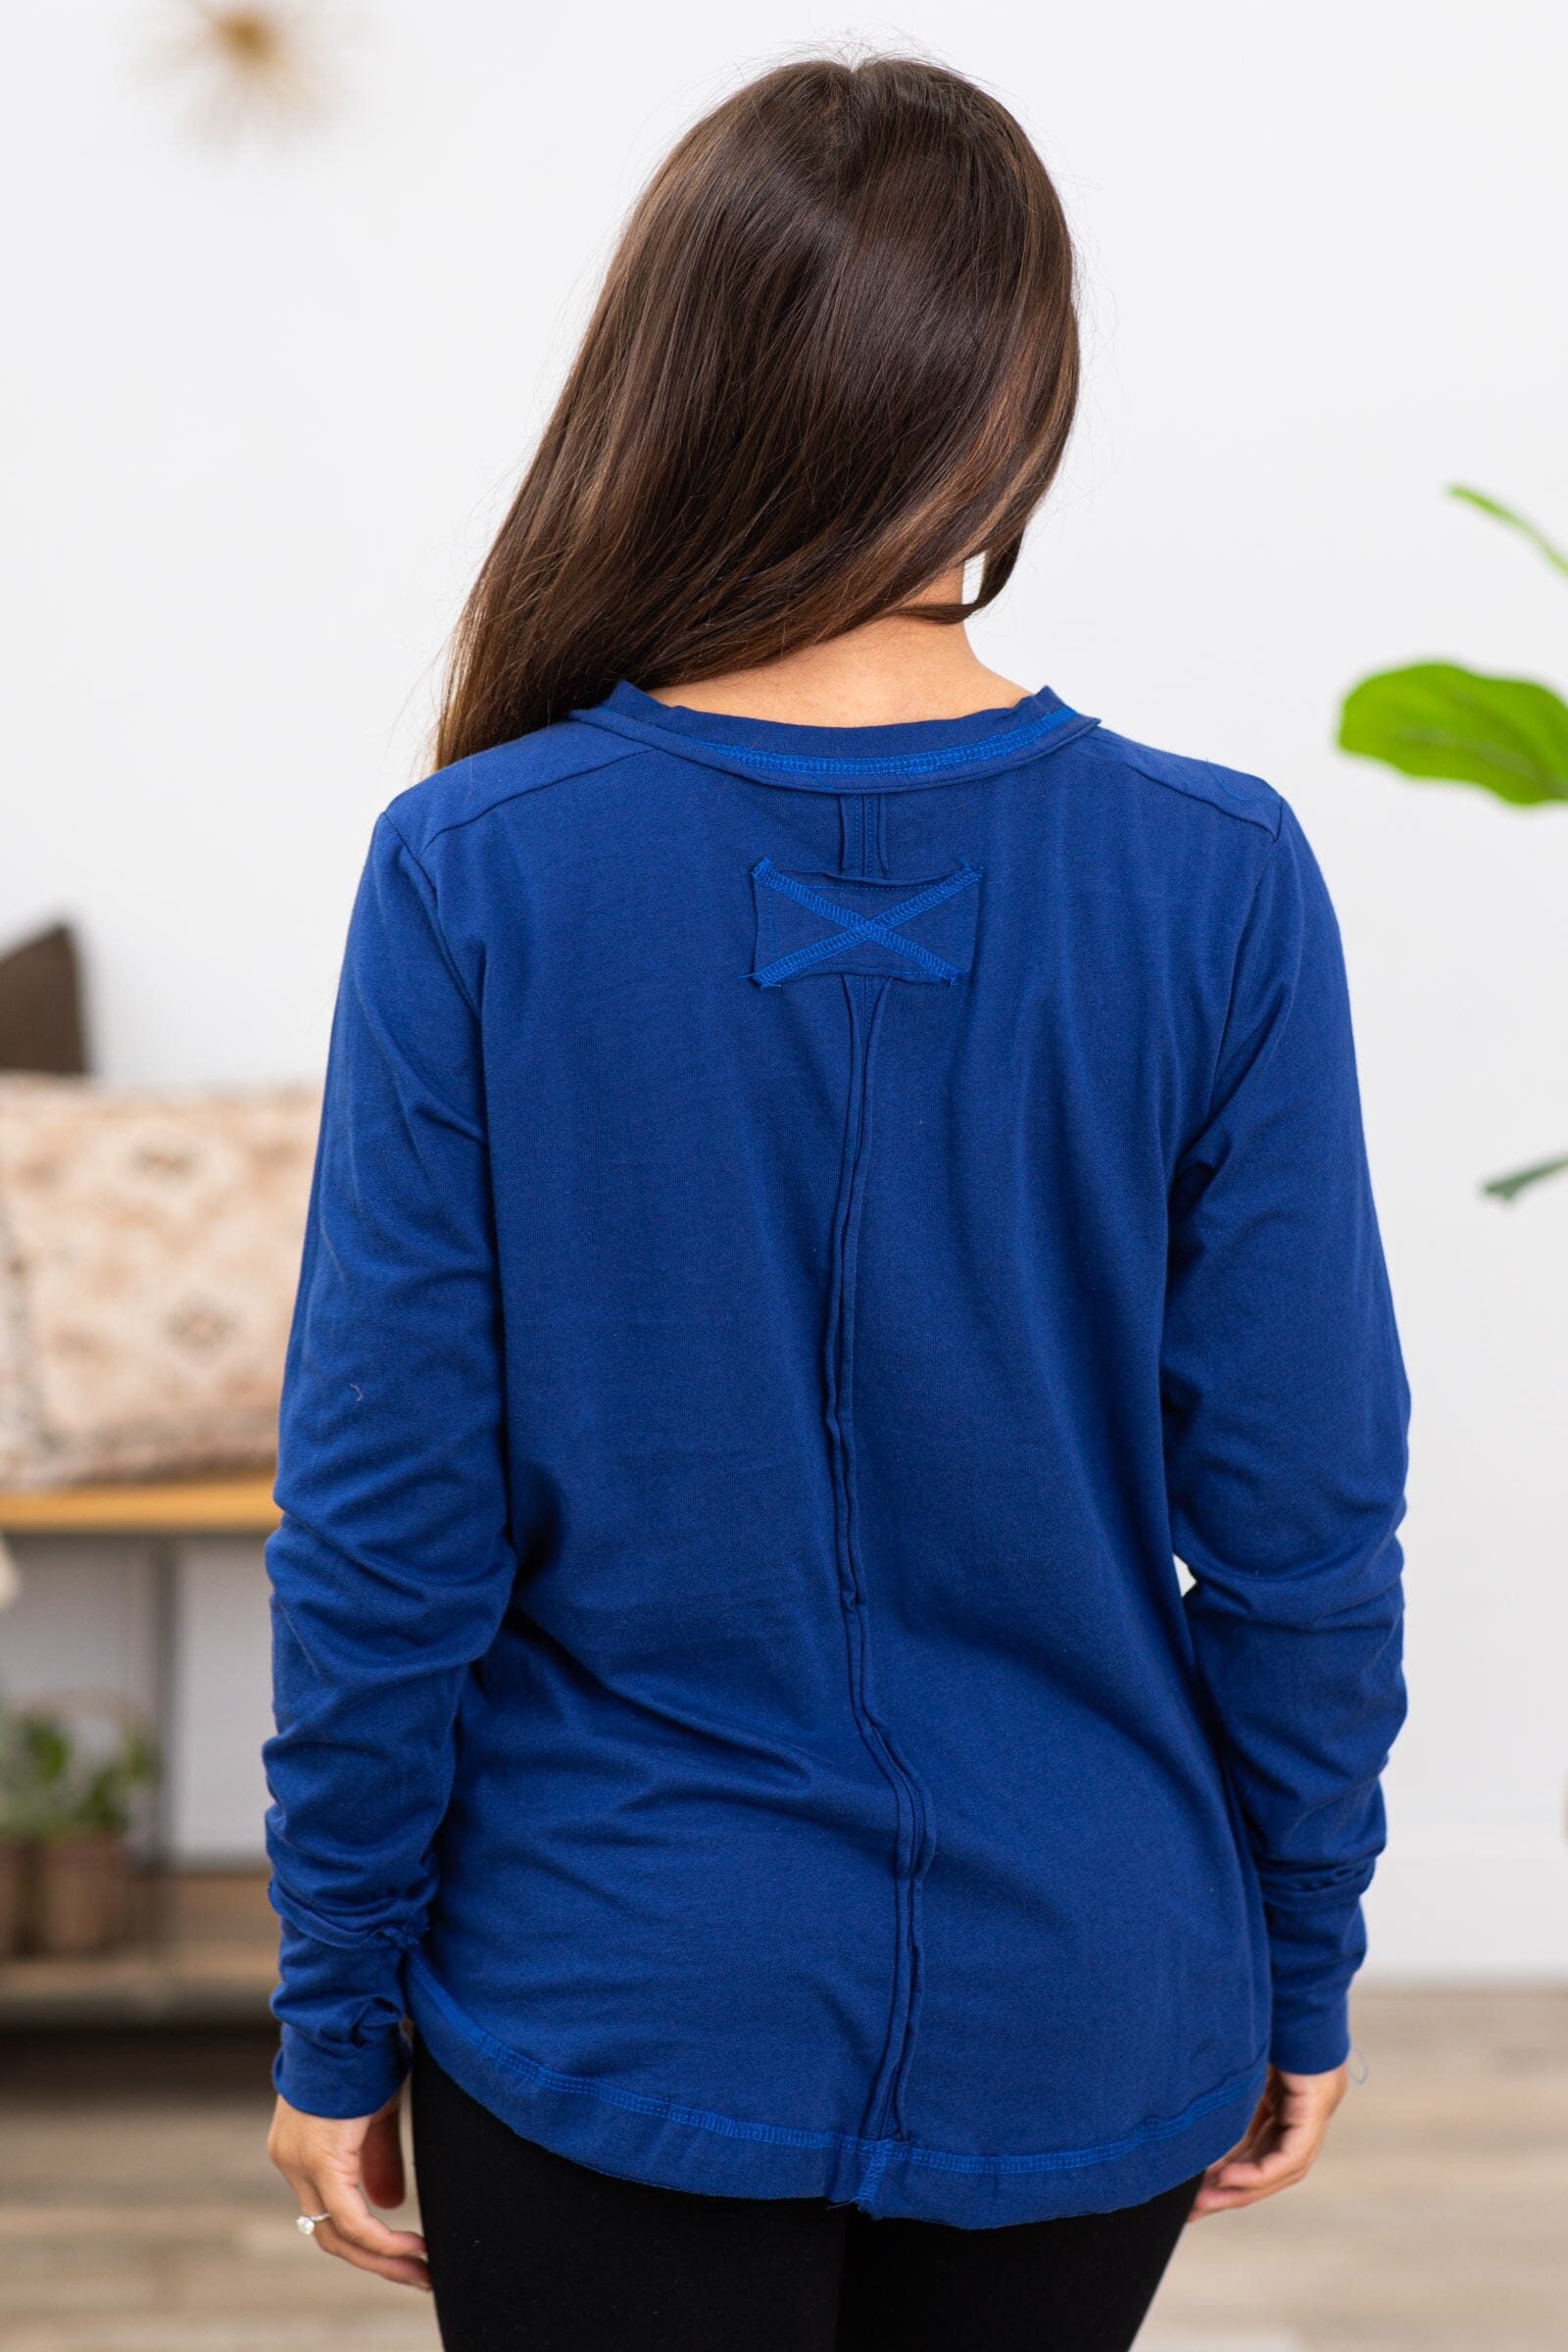 Navy Contrast Stitch Henley Top - Filly Flair